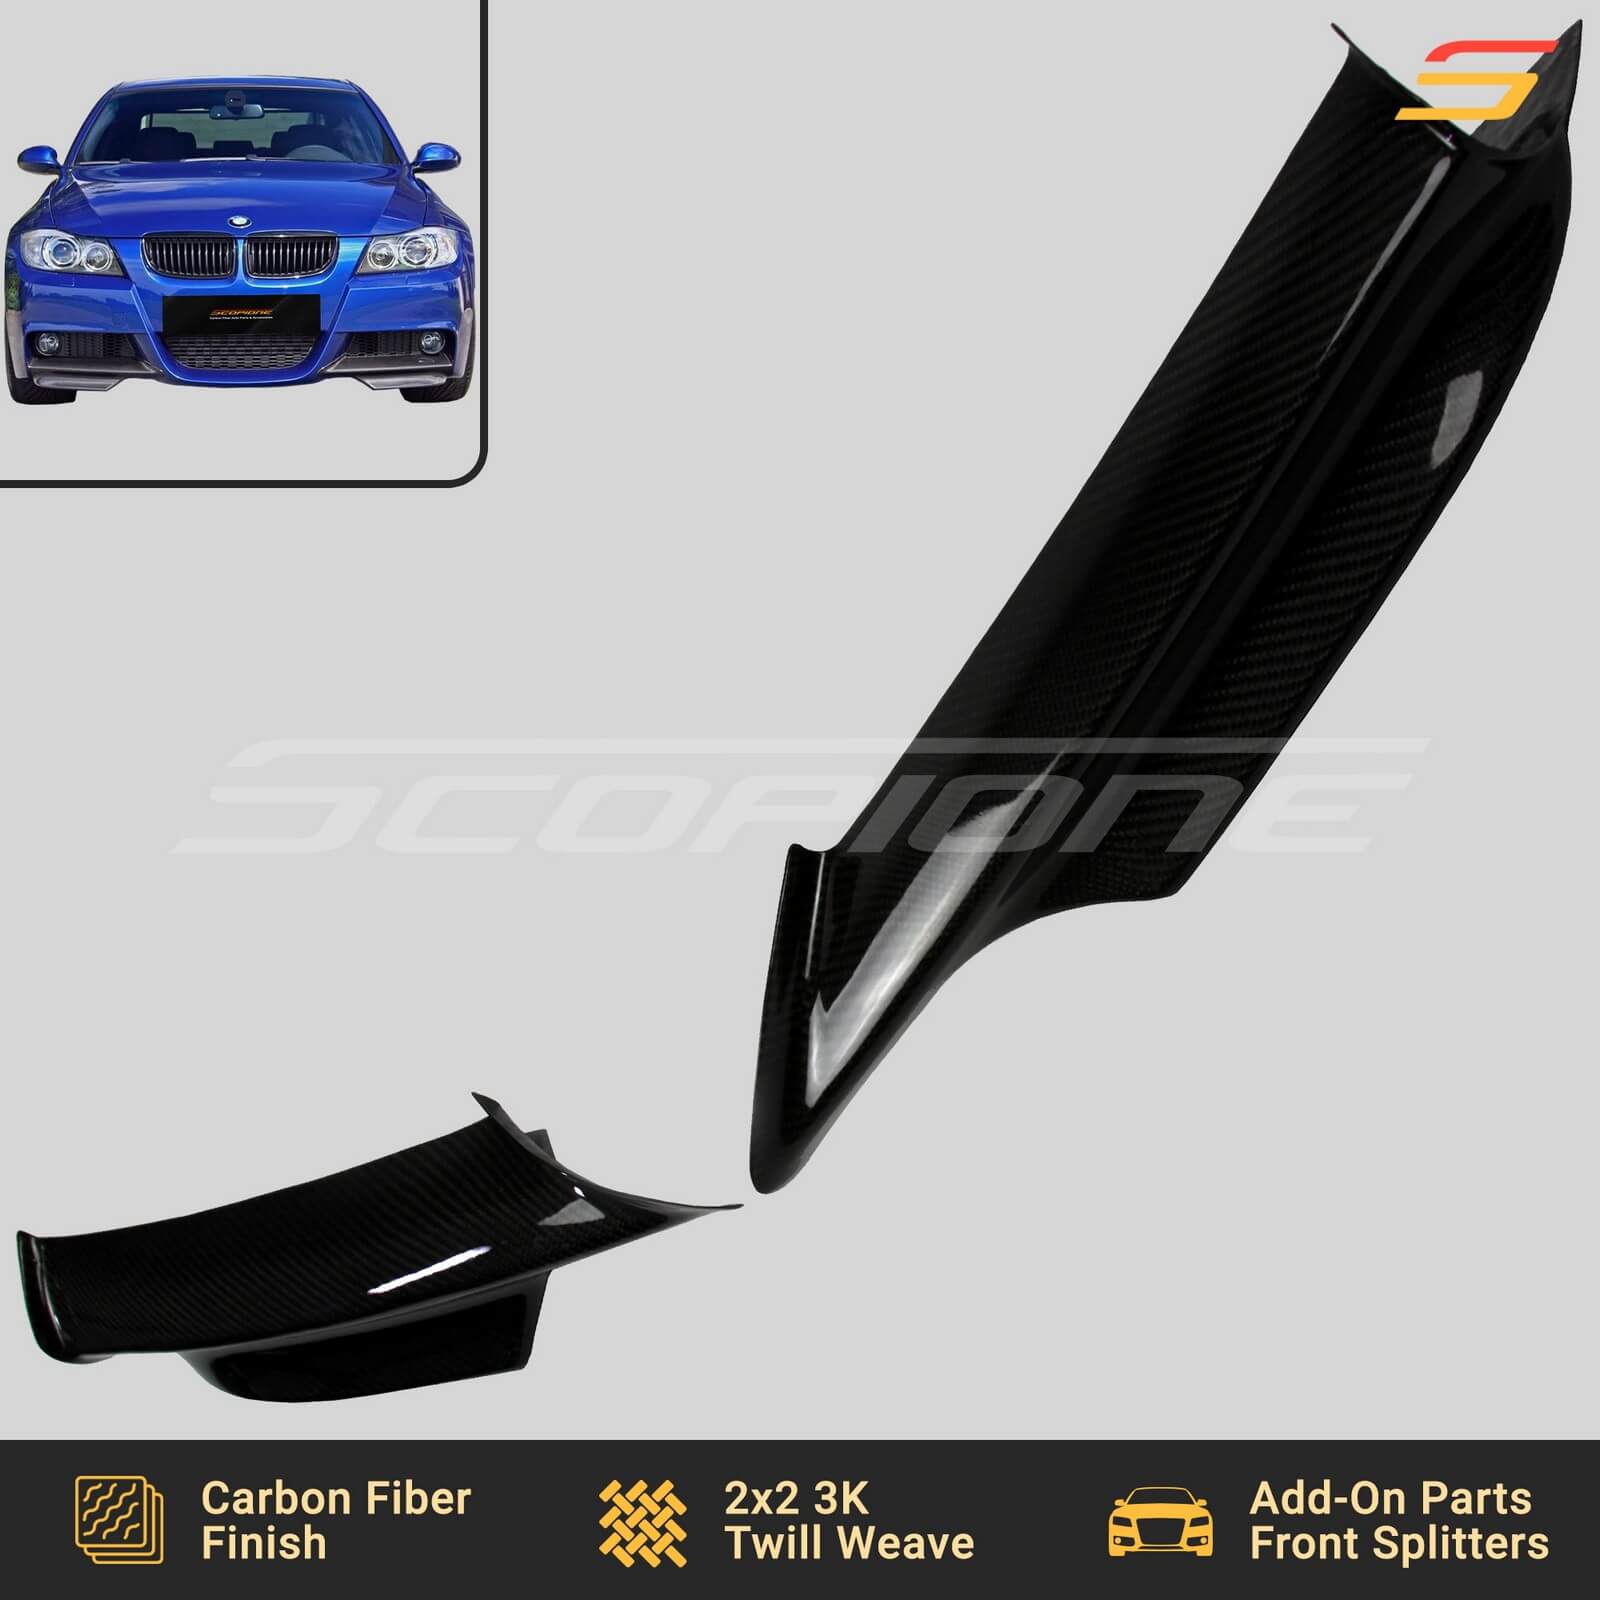 Car Styling and Car Accessories for BMW E90 - SC Styling